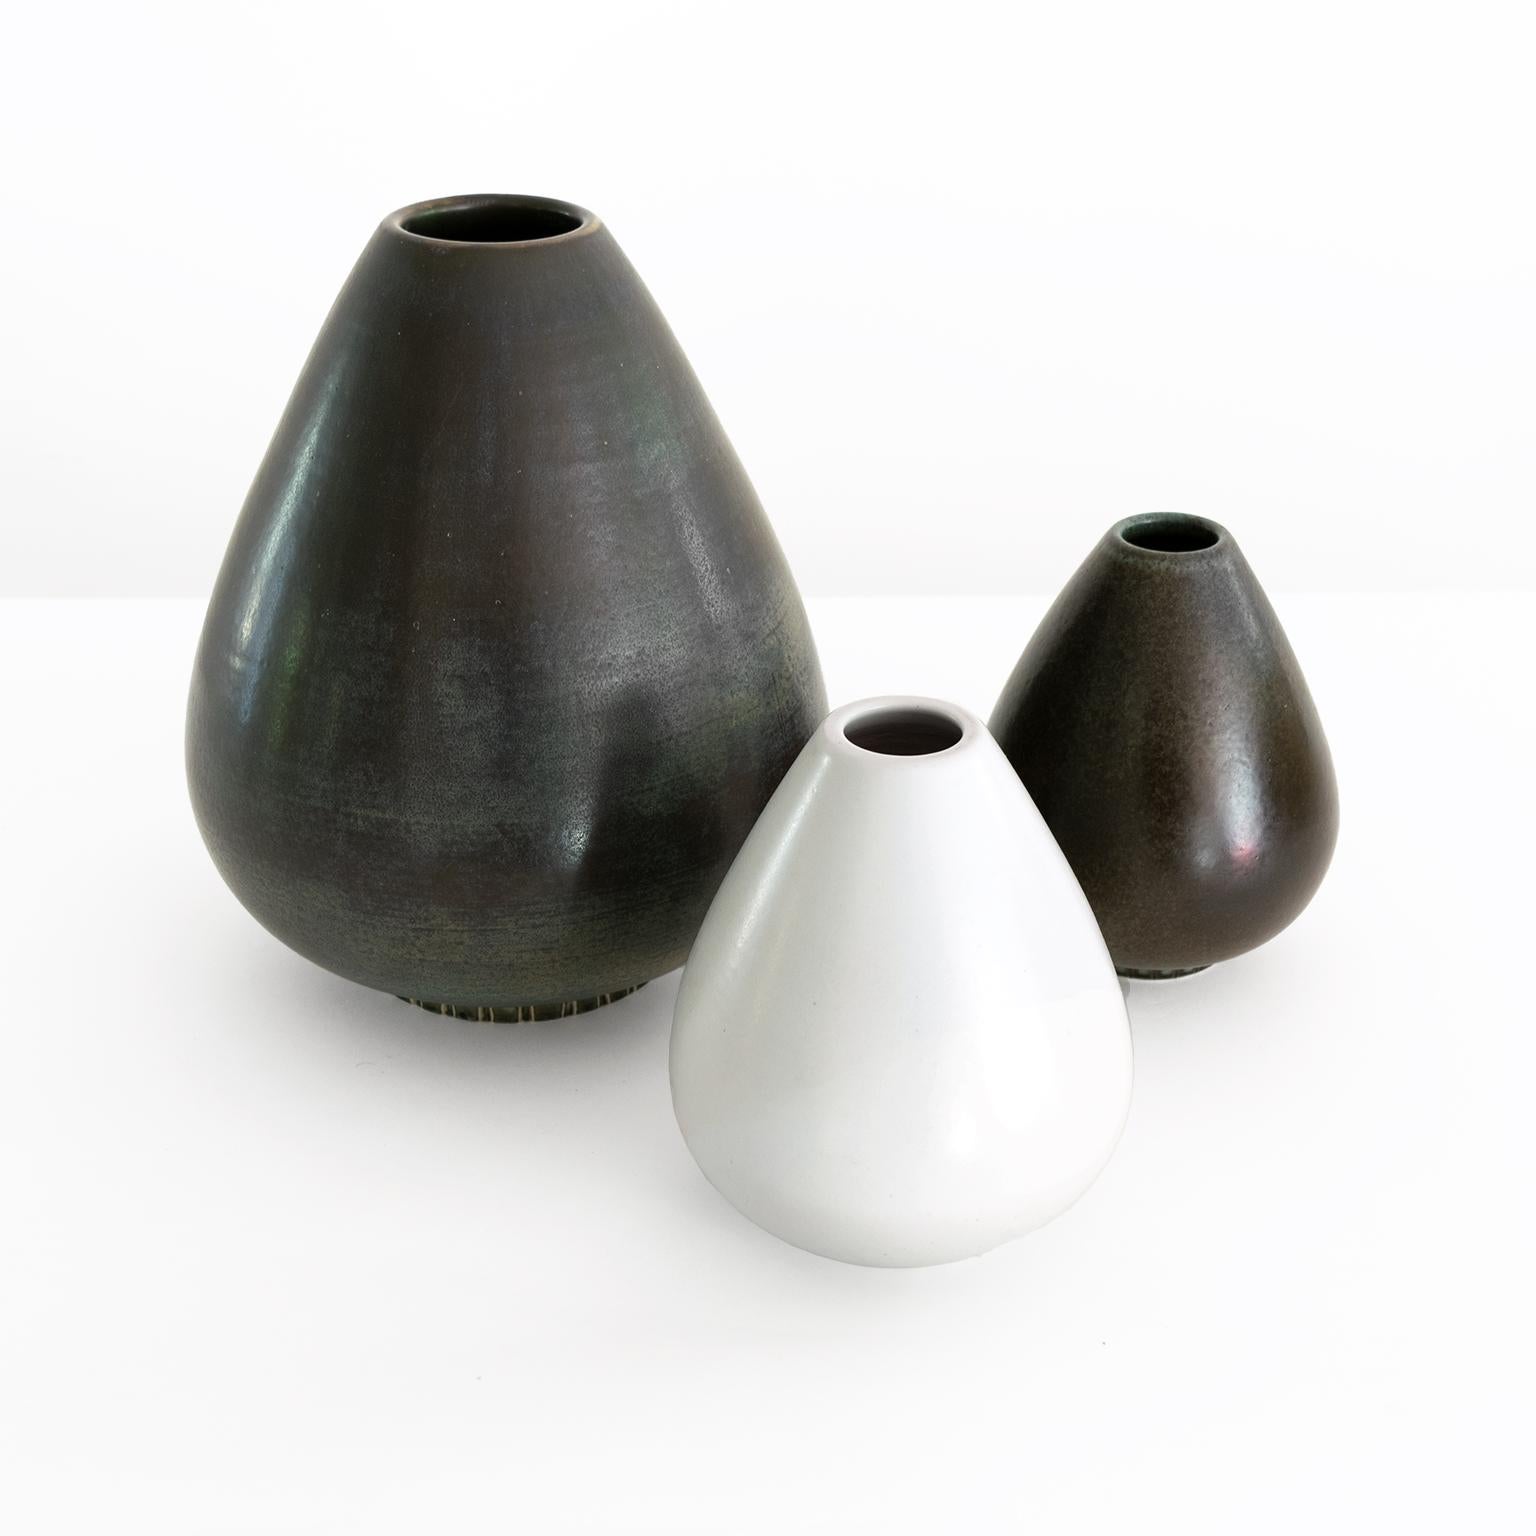 A Scandinavian Modern group of 3 Gunnar Nylund vases in light and dark glazes. Made by Rorstrand, Sweden, circa 1945-1950. 

Measures: Height 11” x diameter 6.5”, heights 6.5” x diameters 5”.